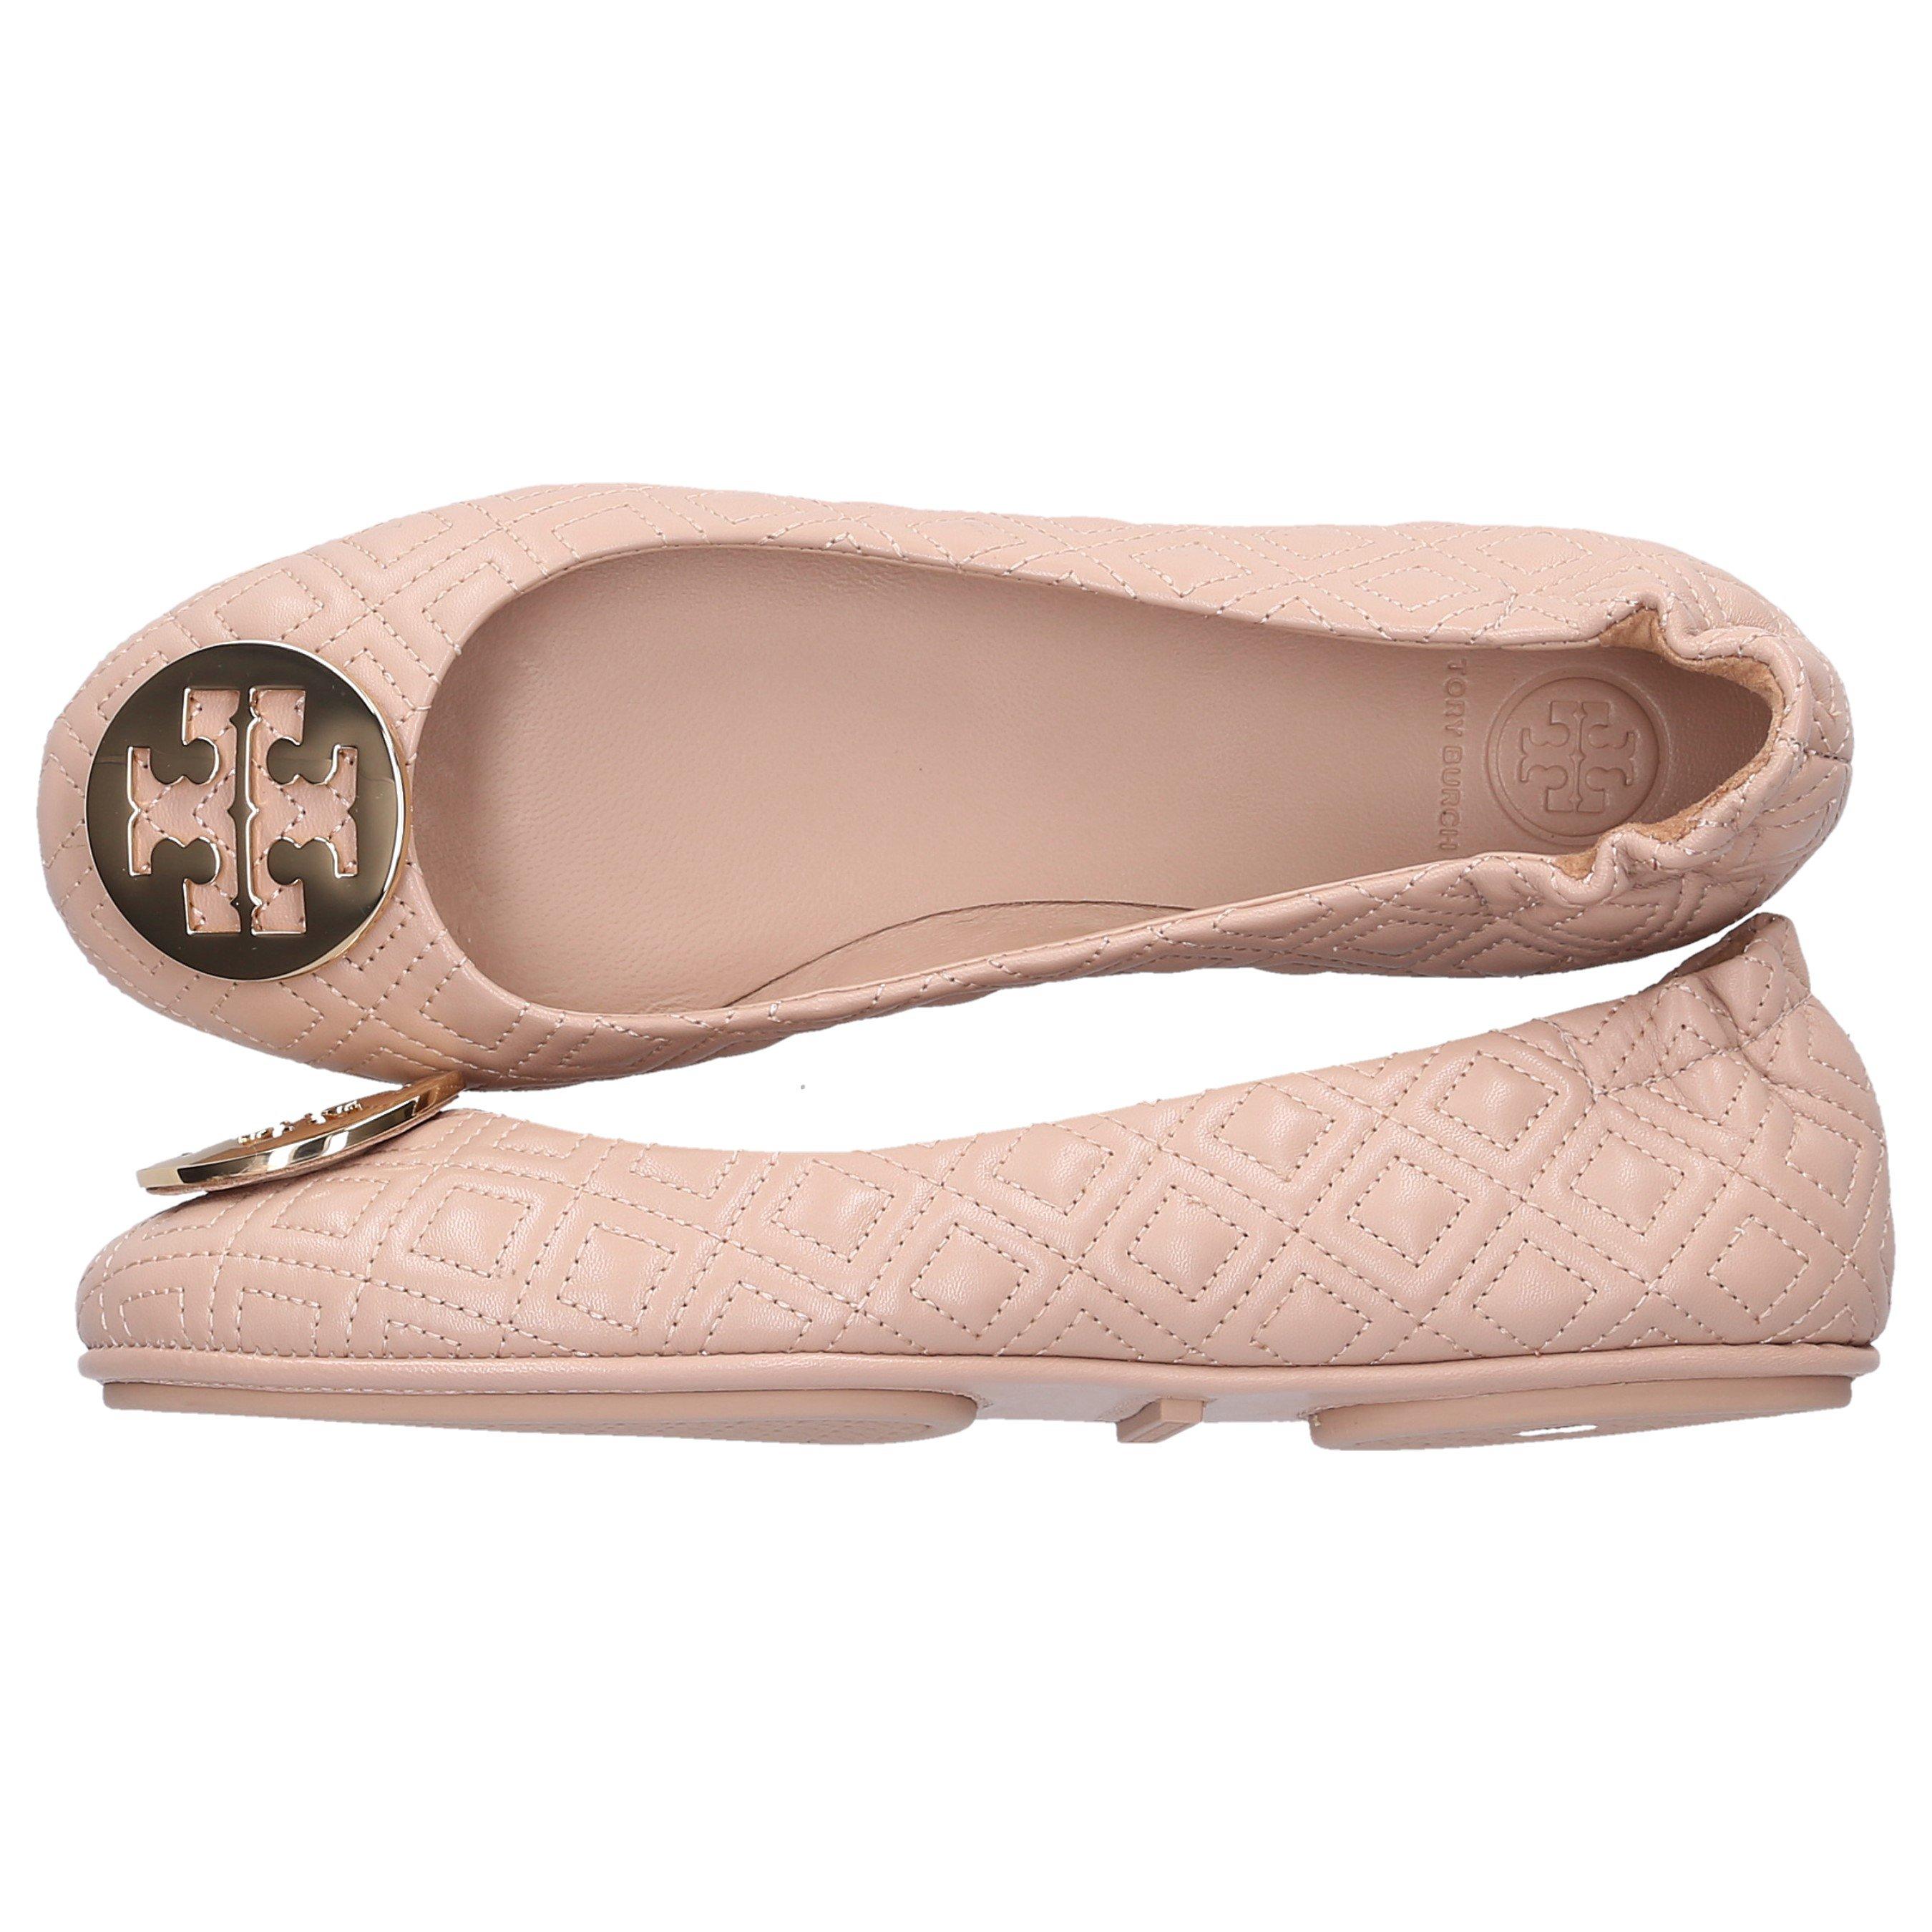 Tory Burch Leather Minnie Travel Ballet With Logo in Beige 